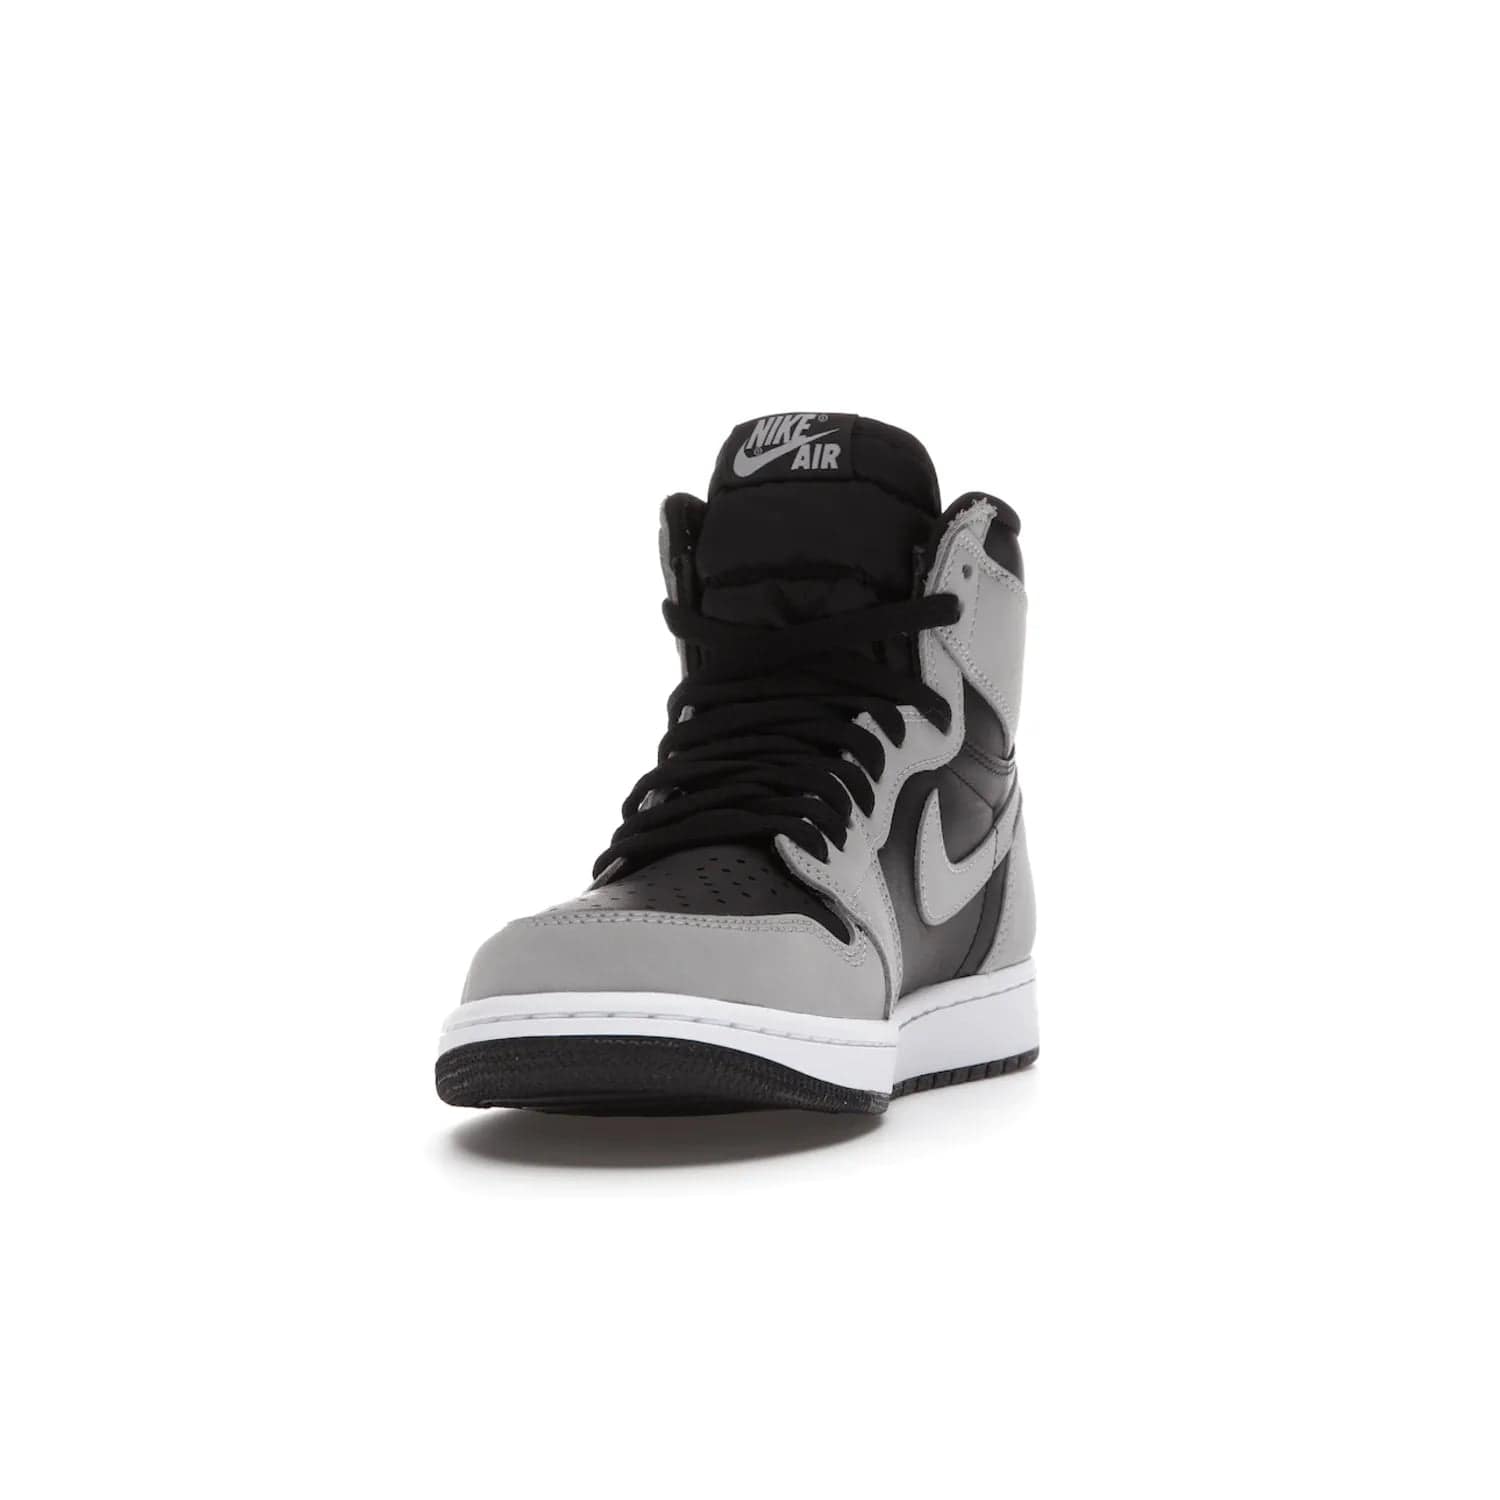 Jordan 1 Retro High Shadow 2.0 - Image 12 - Only at www.BallersClubKickz.com - #
Classic Air Jordan 1 Retro High Shadow 2.0 with black leather base and Light Smoke Grey overlays. Released in May 2021.